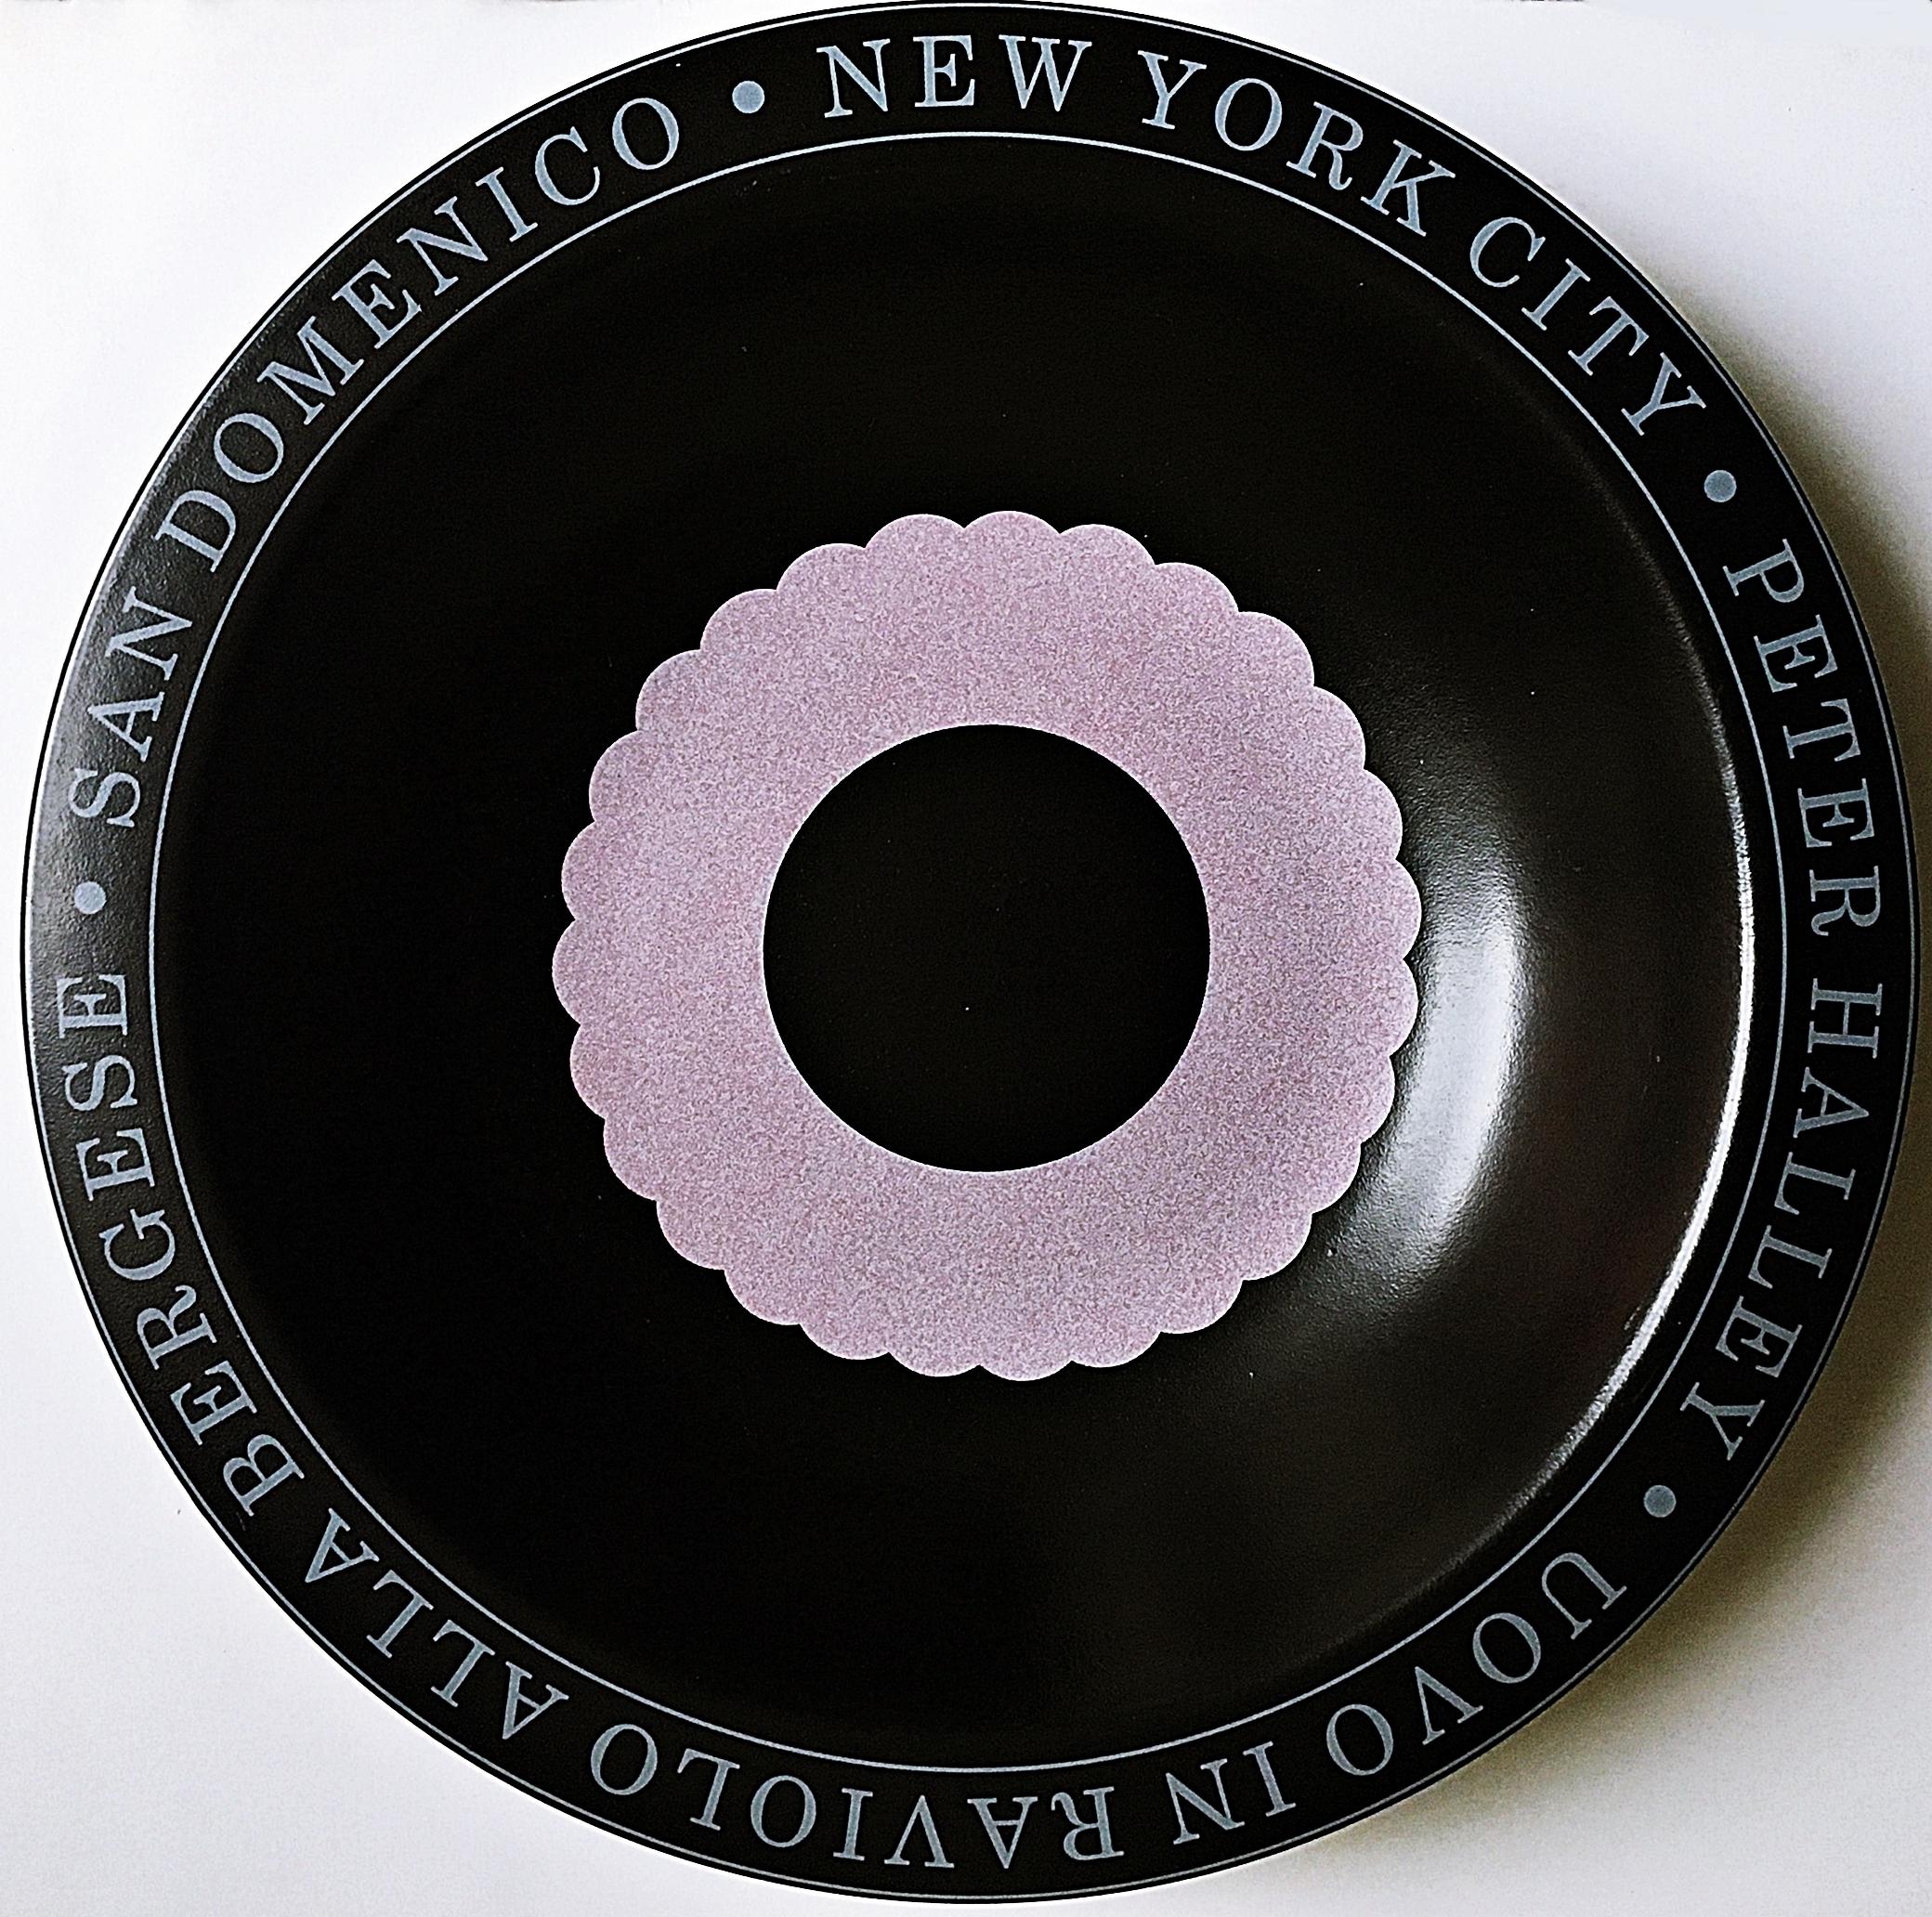 Limited Edition ceramic plate Uovo In Raviolo Alla Bergese, San Domenico NY S/N - Mixed Media Art by Peter Halley